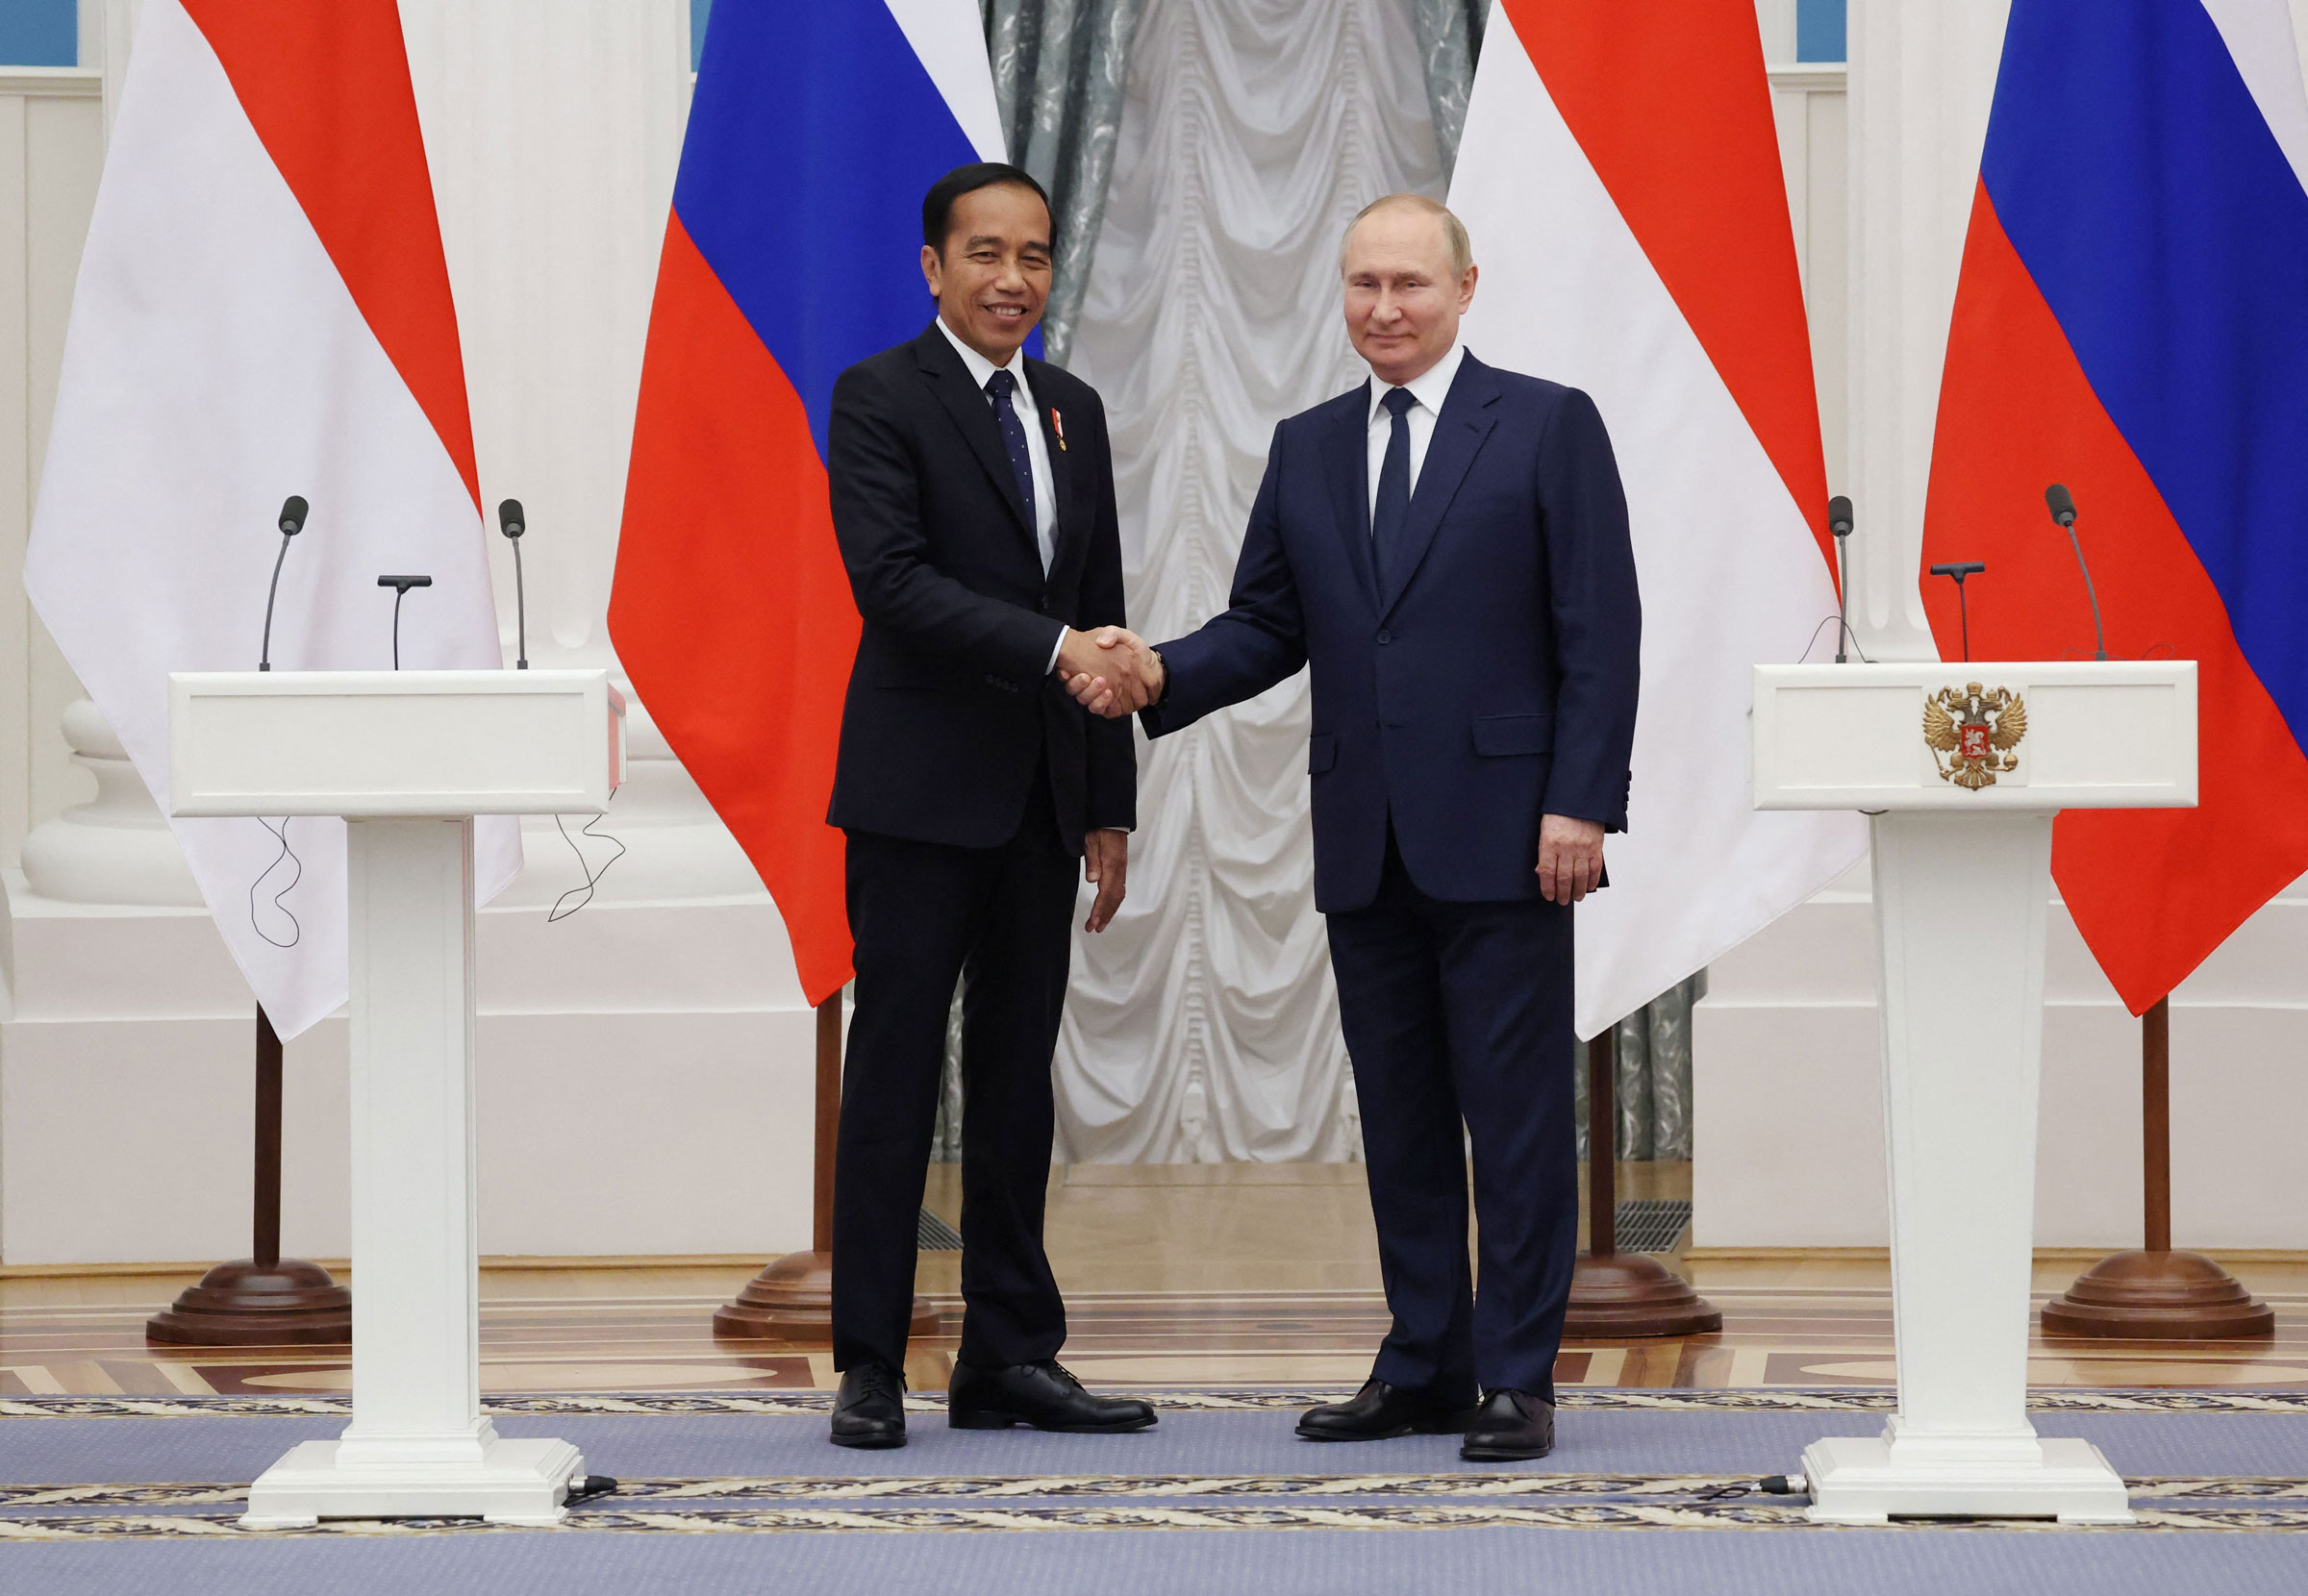 Russian President Vladimir Putin shakes hands with Indonesia’s President Joko Widodo after a press conference at the Kremlin in Moscow, on June 30, 2022. (Vyacheslav Prokofyev—Sputnik/AFP/Getty Images)